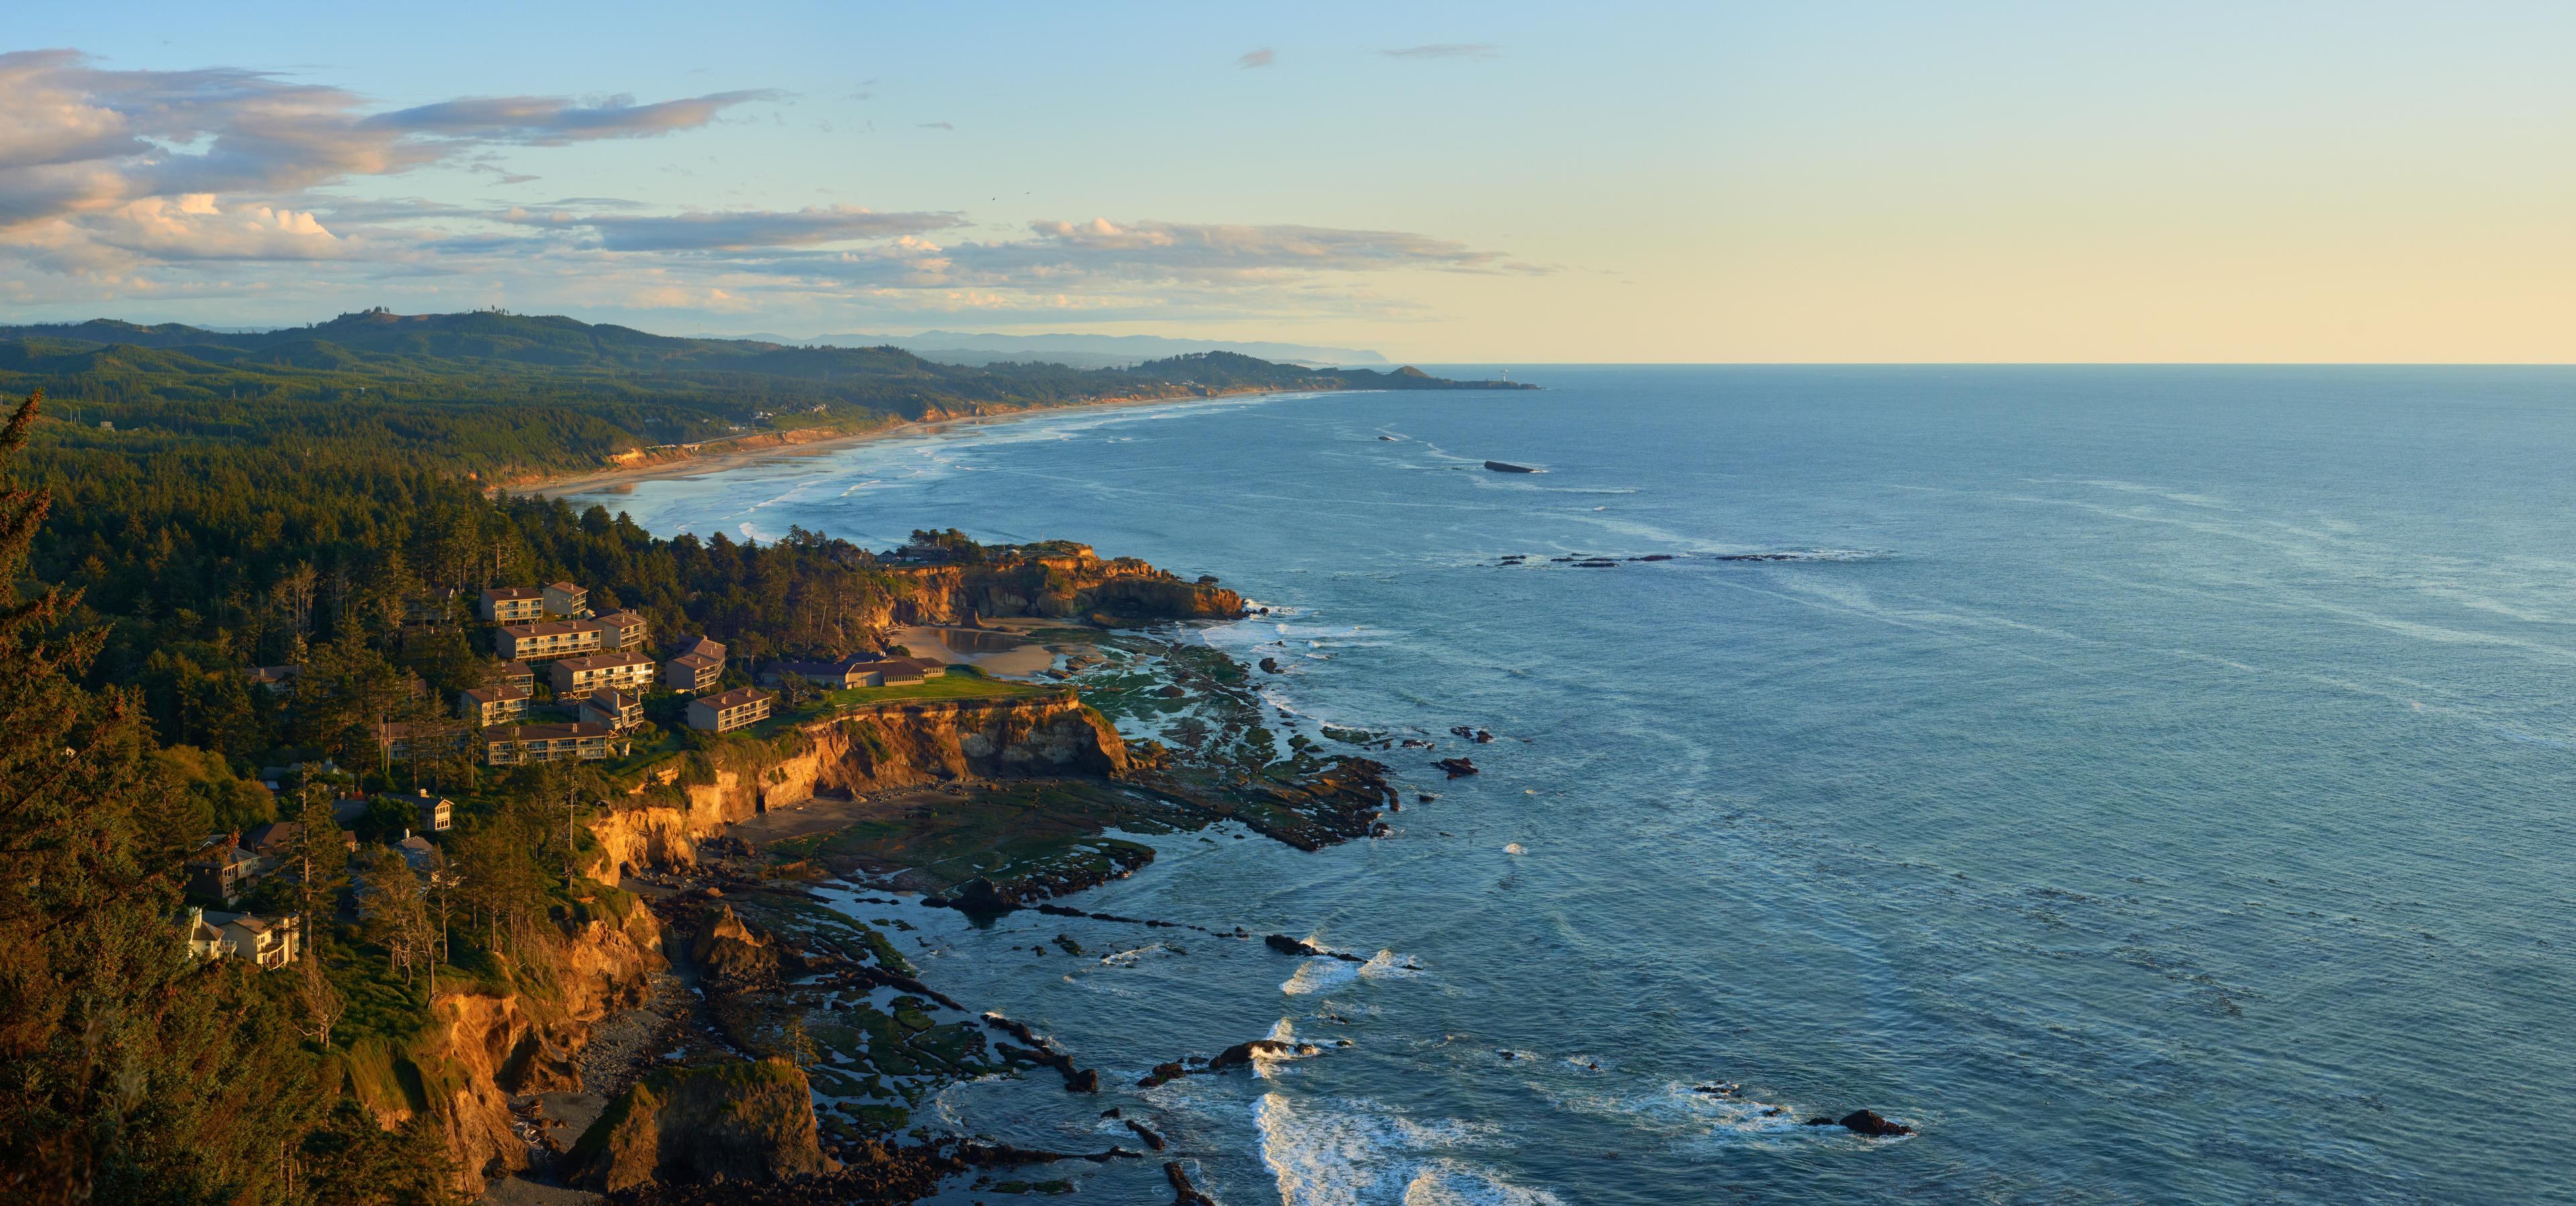 Panoramic view of the Oregon coastline at sunset near Lincoln City.